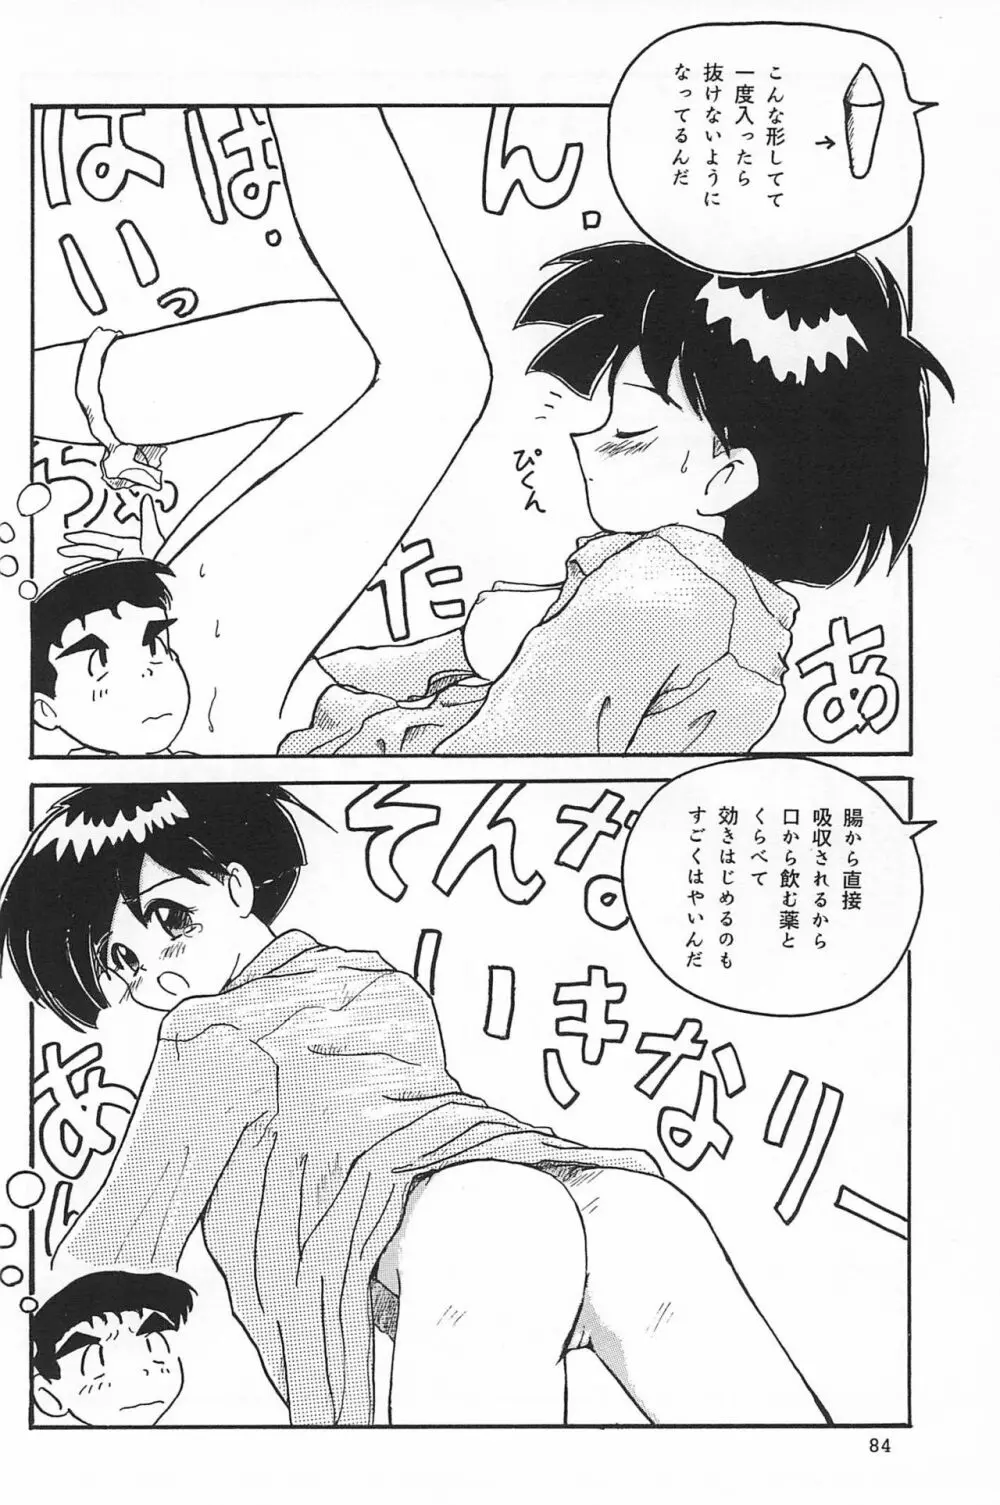 ND-special Volume 1 84ページ